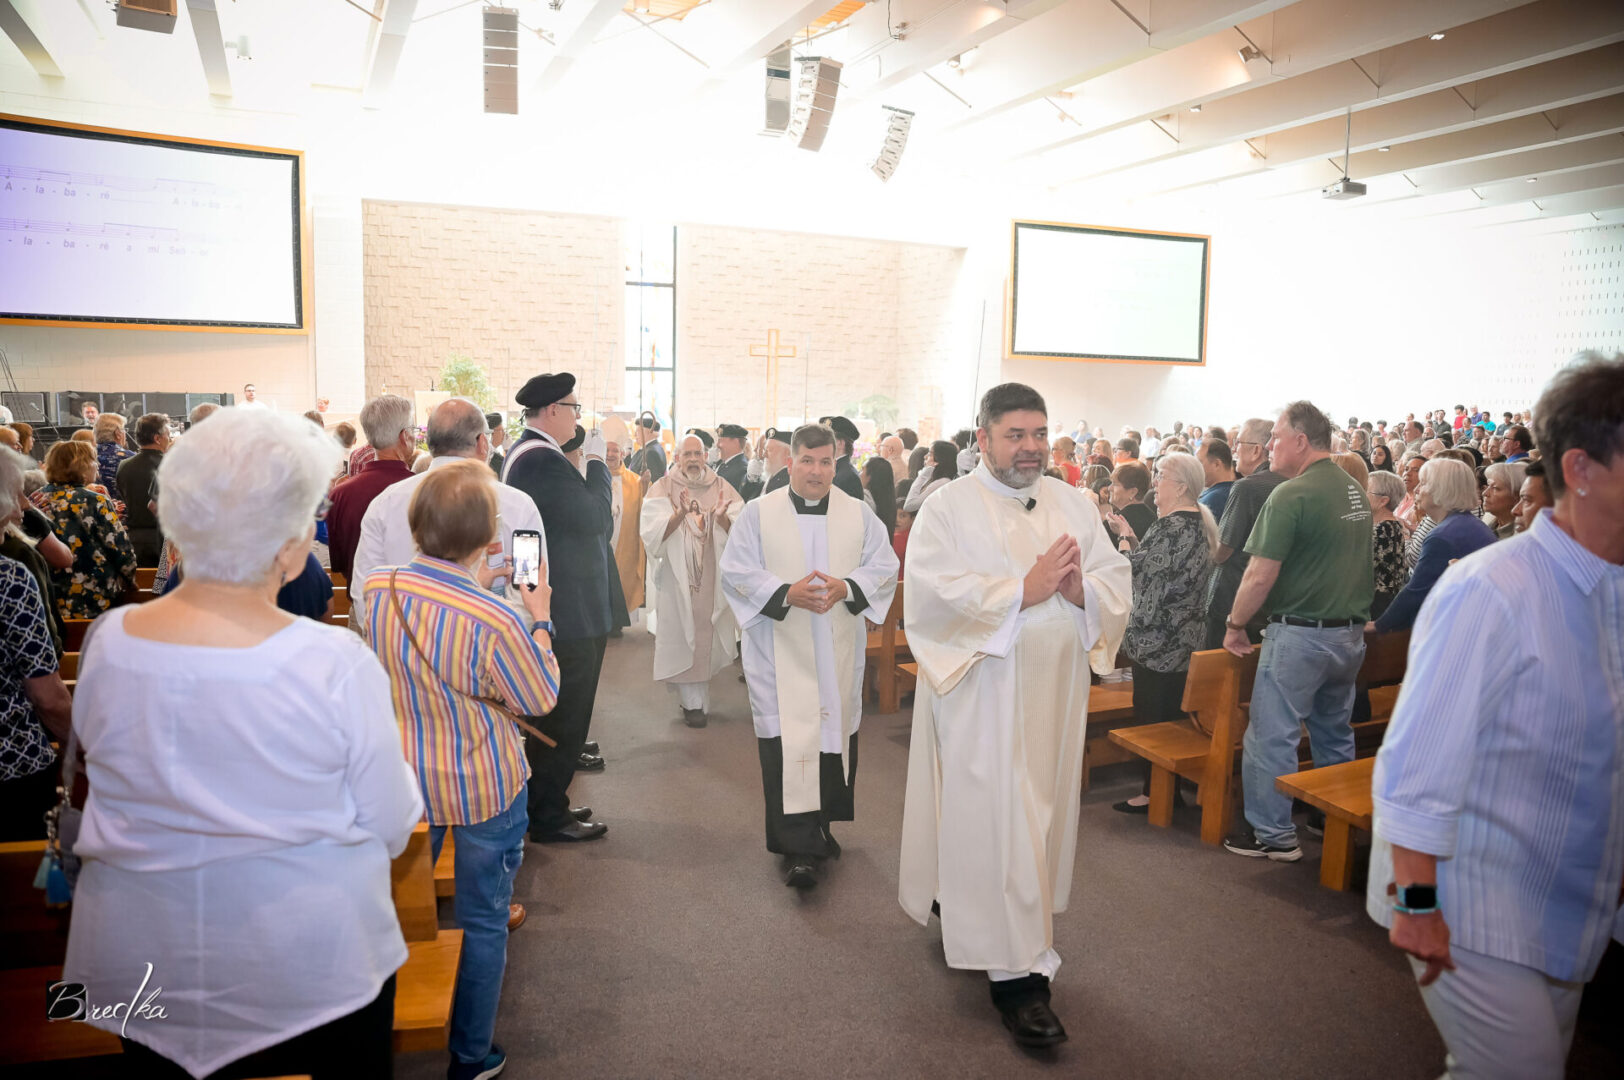 Two priests walking down an aisle.